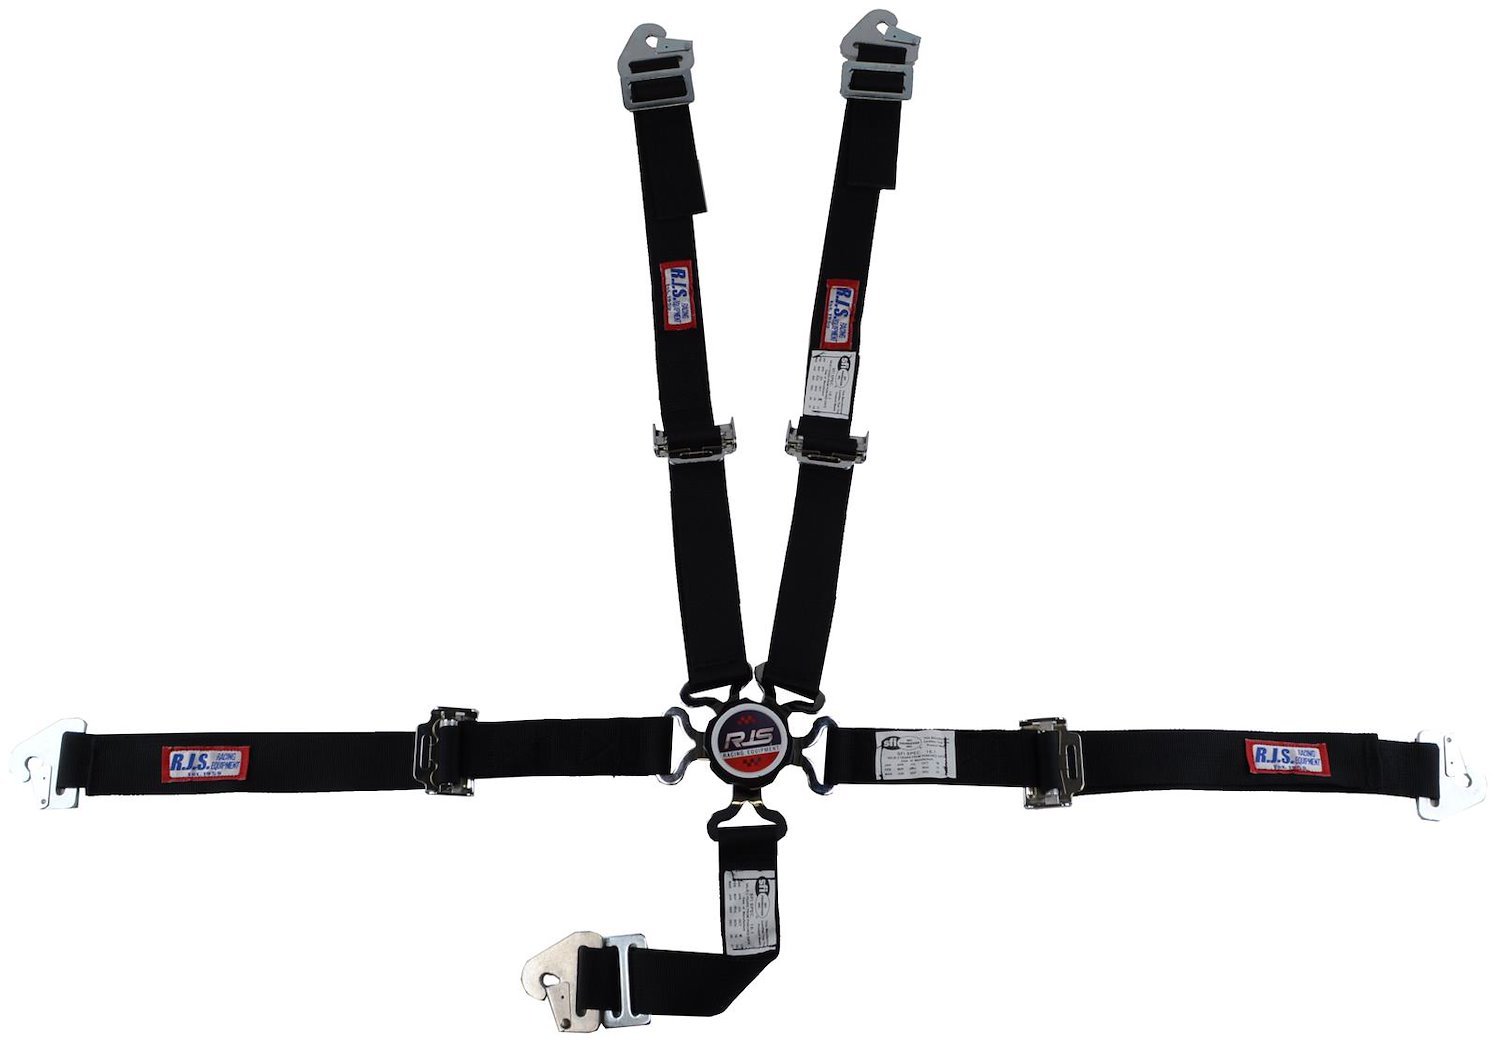 SFI 16.1 CAM-LOCK HARNESS 2 PULL DOWN Lap Belt 2 Shoulder Harness Individual ROLL BAR Mount 2 DOUBLE Sub ALL WRAP ENDS PURPLE